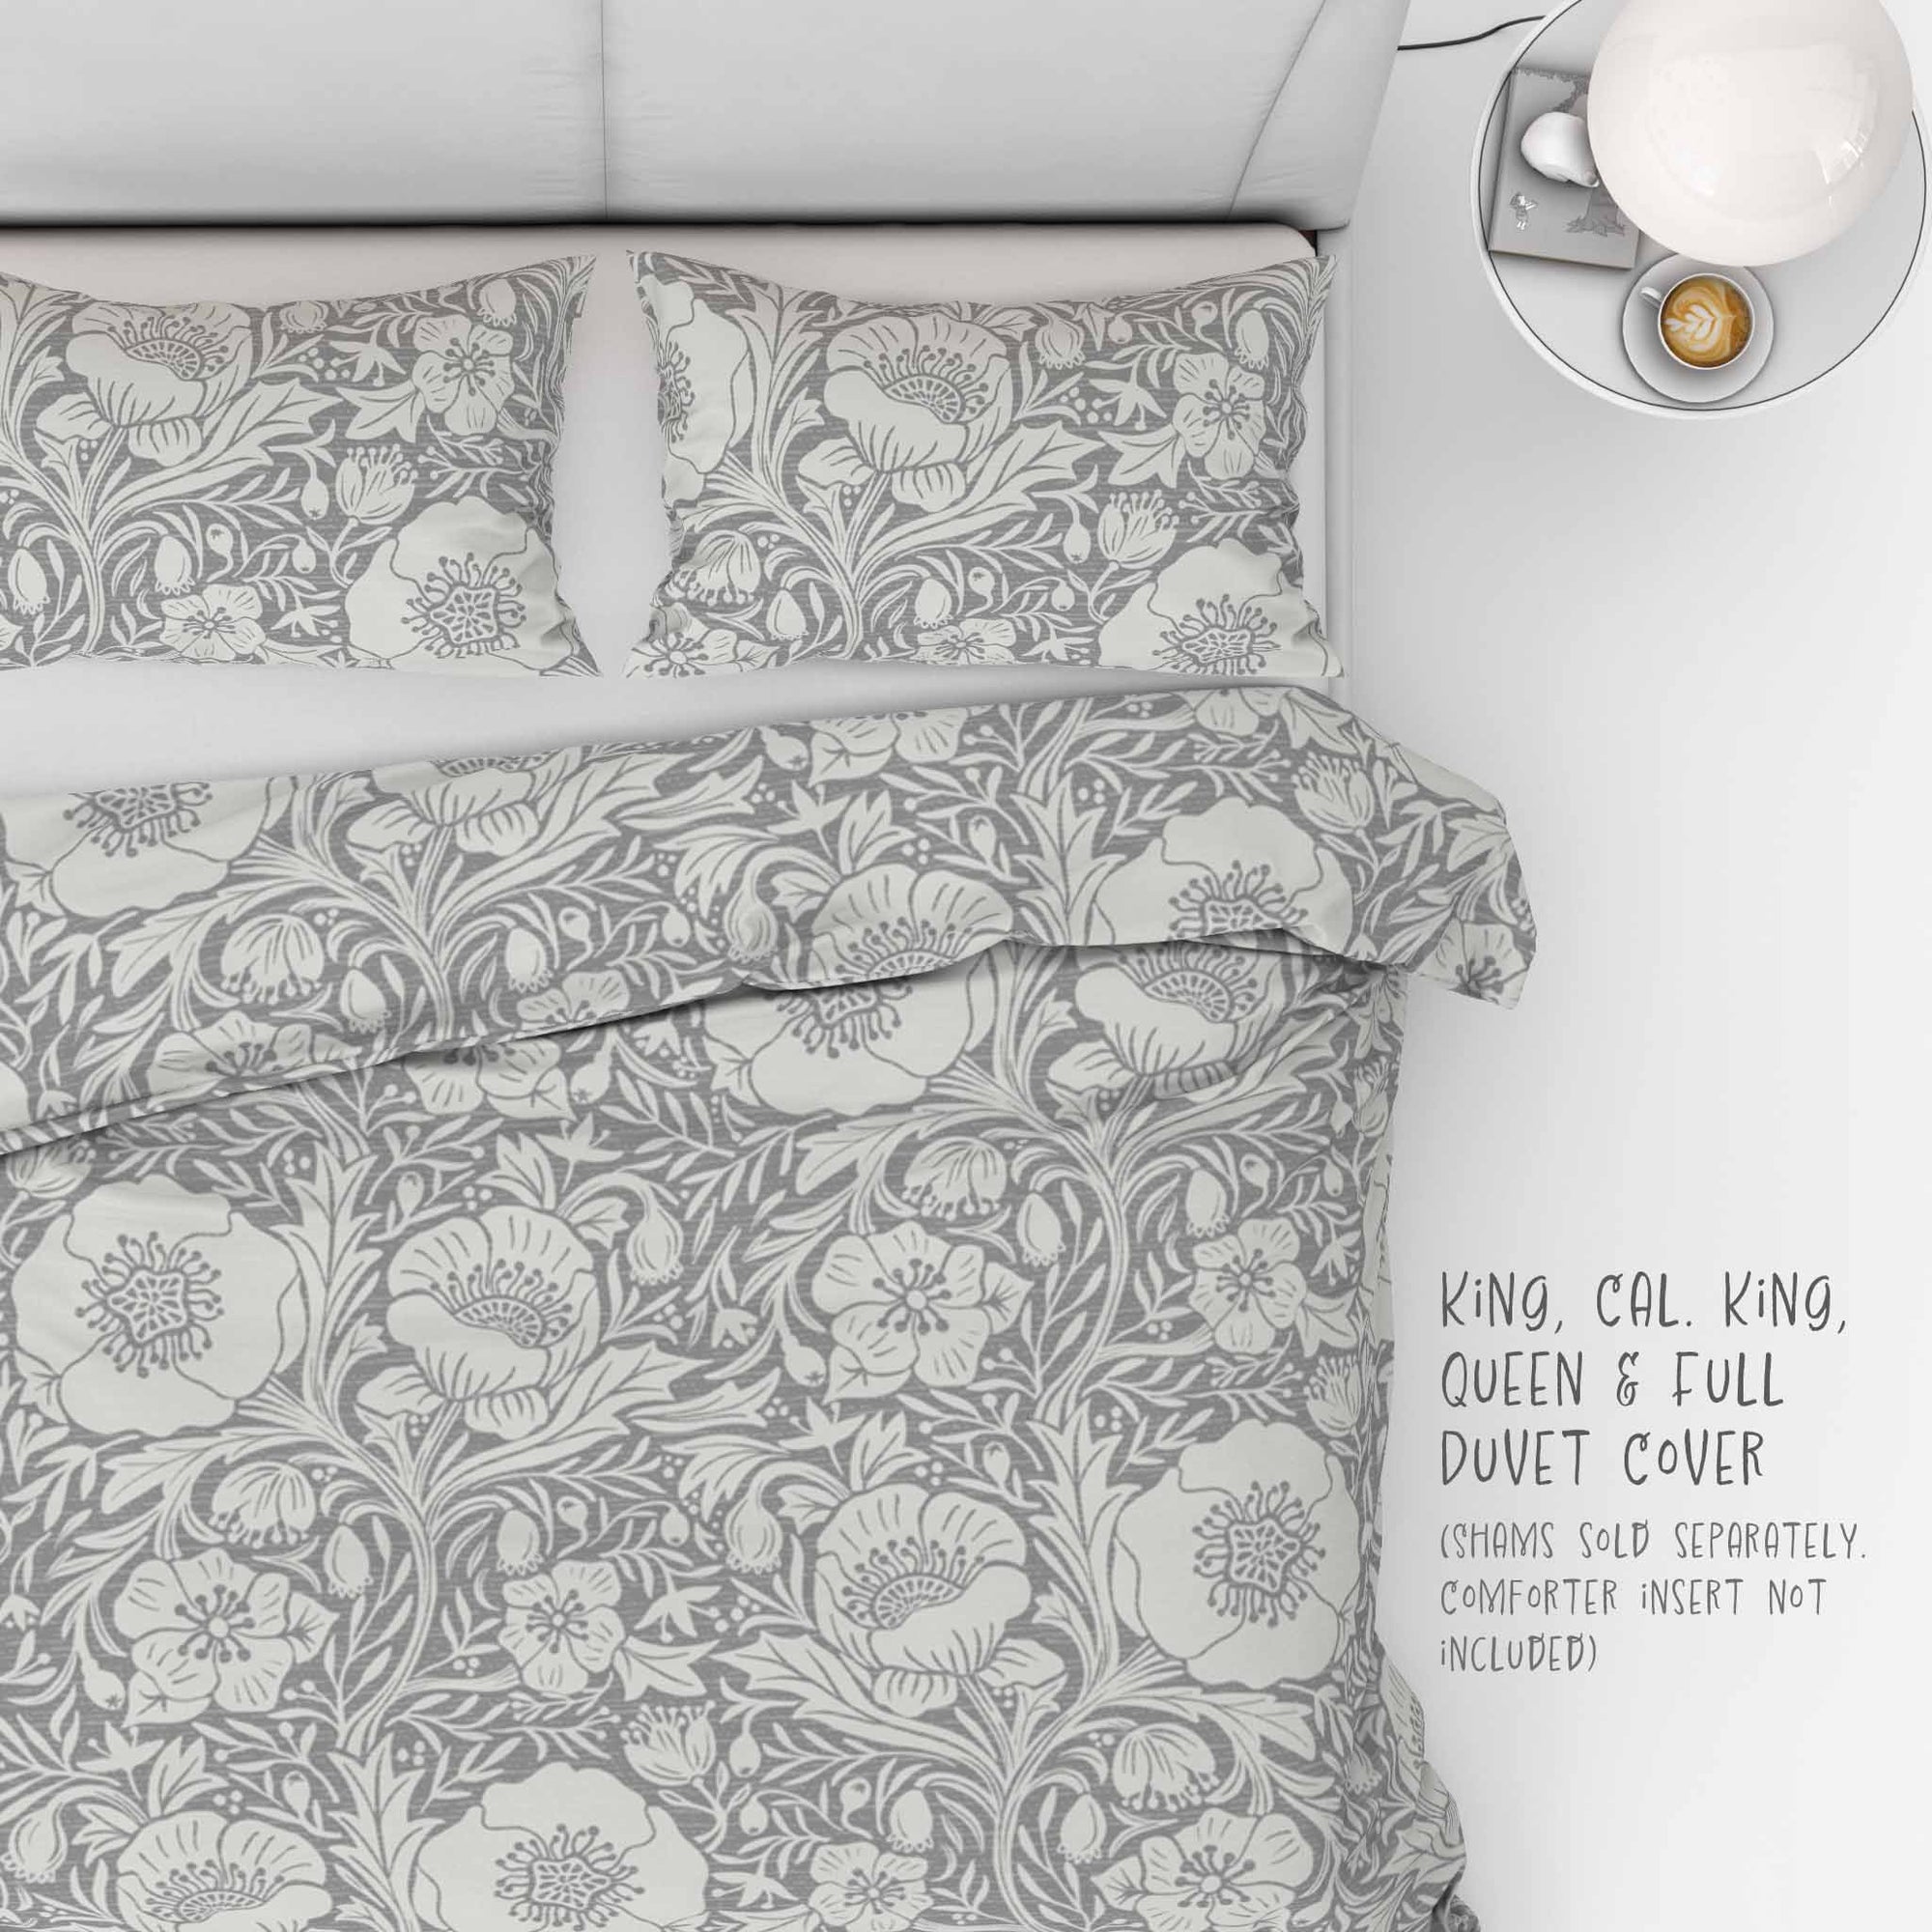 Poppies on gray background 100% Cotton Duvet Cover: King, Cal King, Queen and Full sizes.